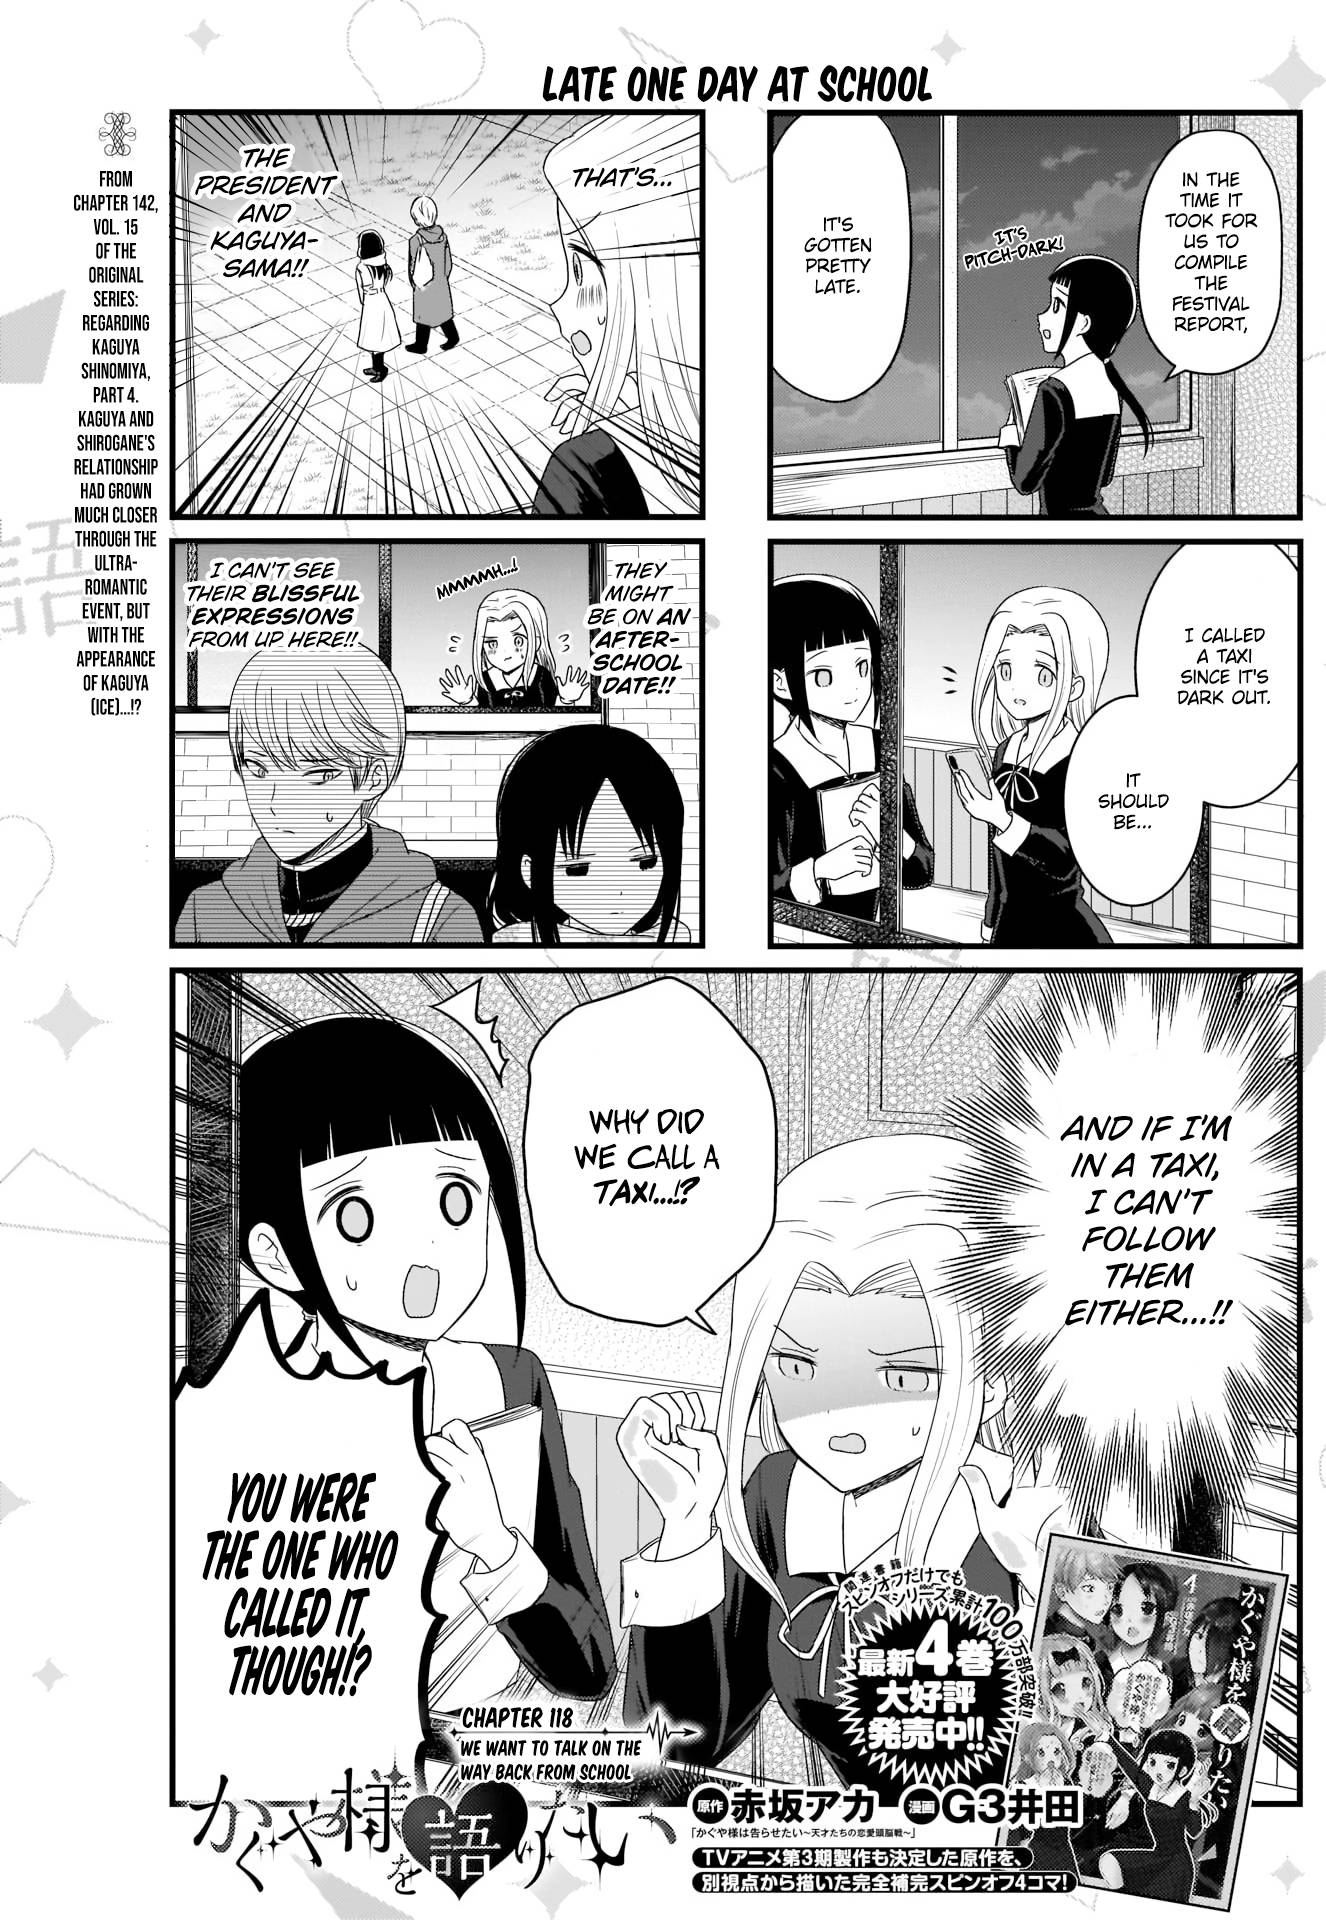 We Want to Talk About Kaguya - chapter 118 - #2